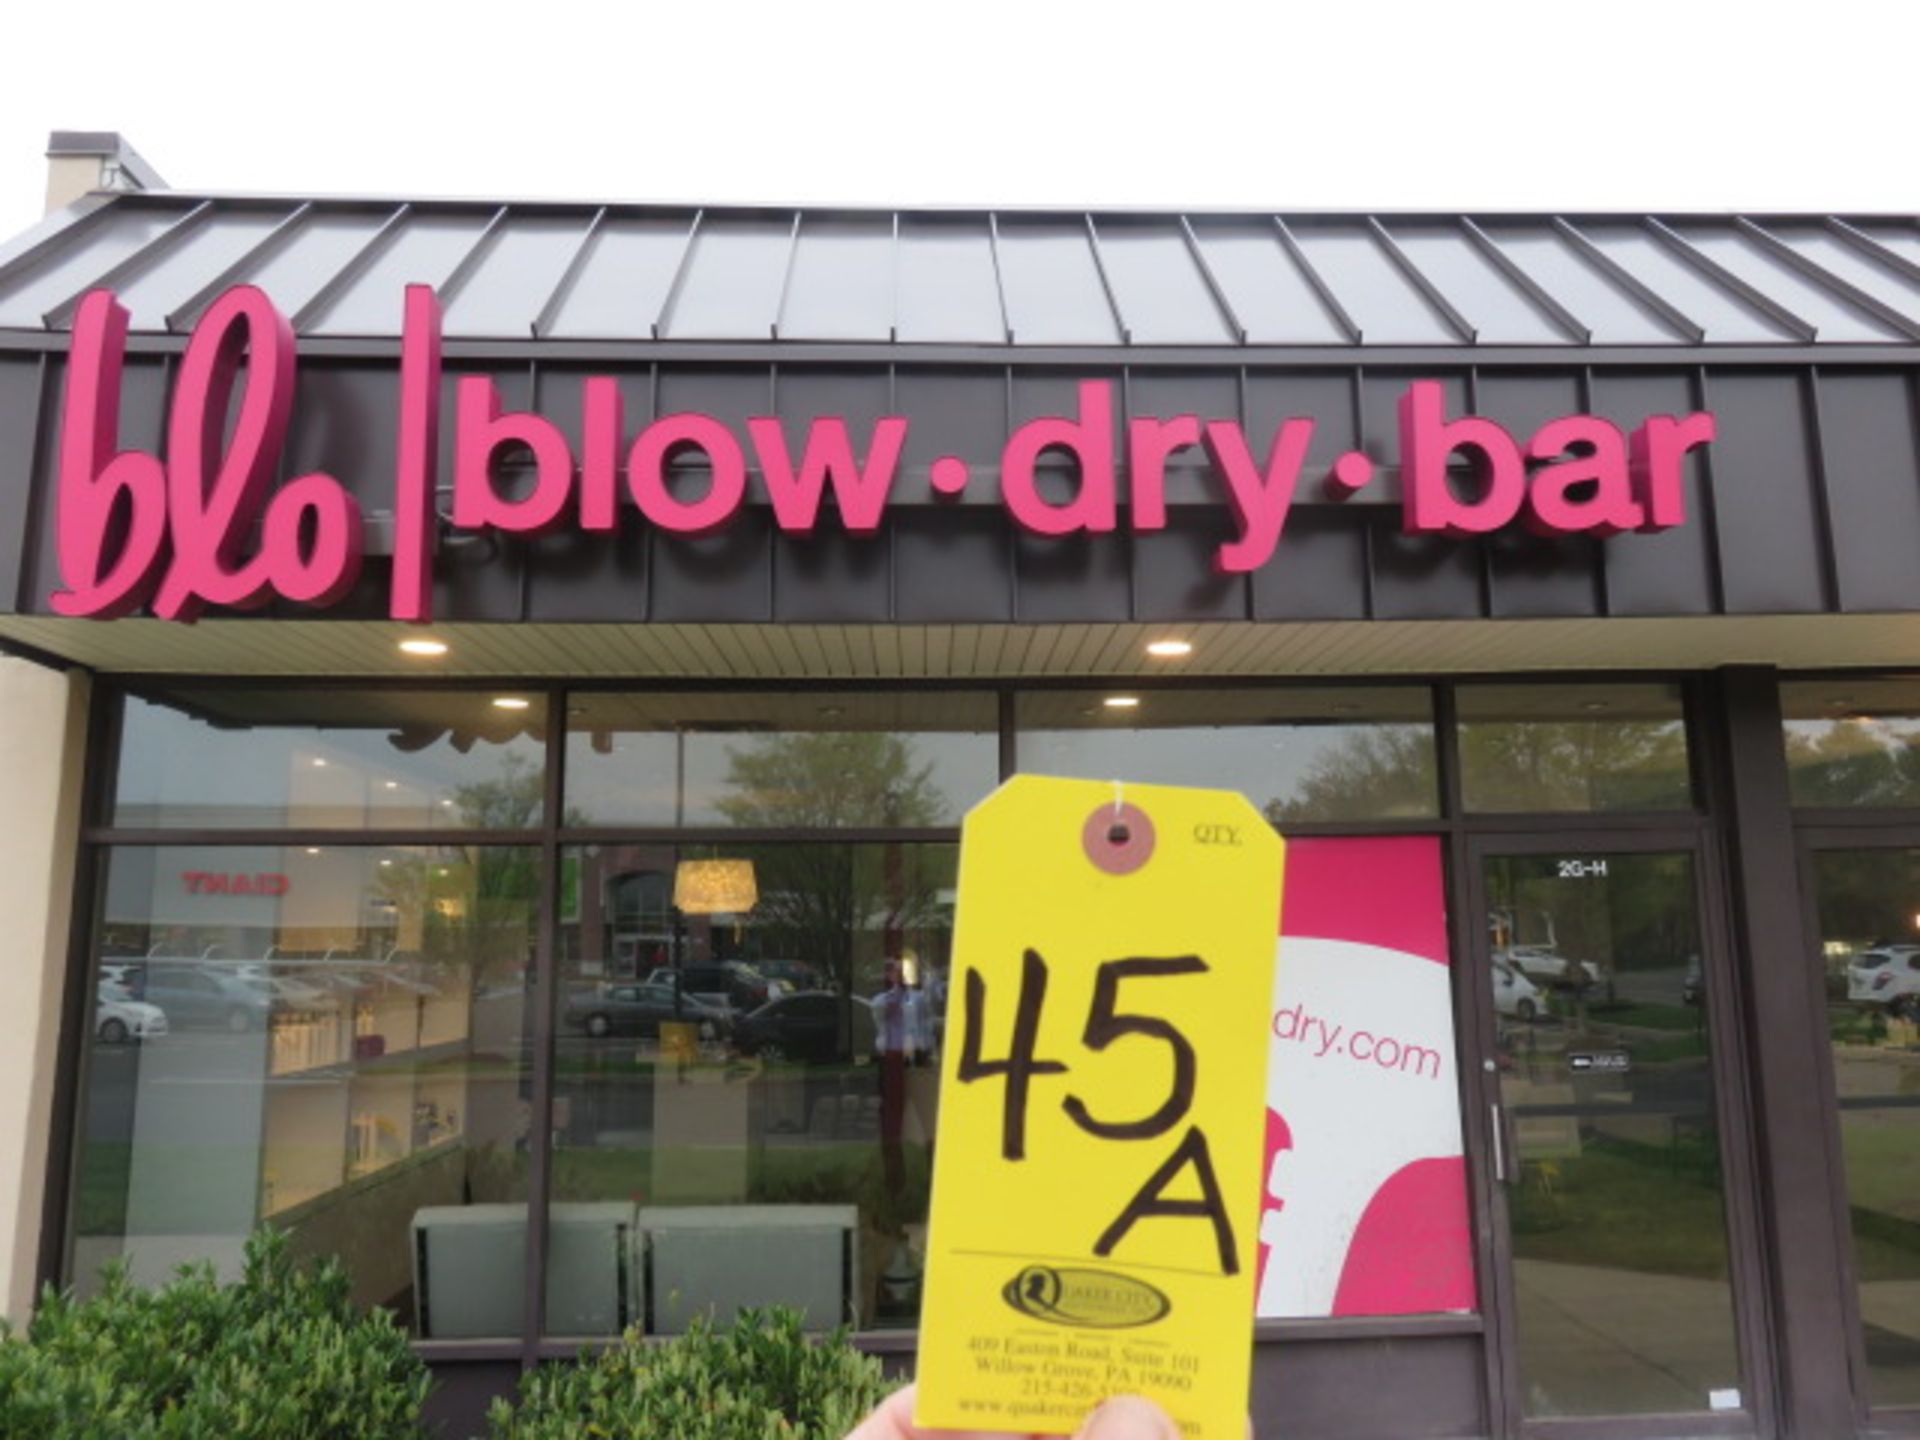 OUTDOOR BLO BLOW DRY BAR BUILDING SIGN - Image 2 of 2